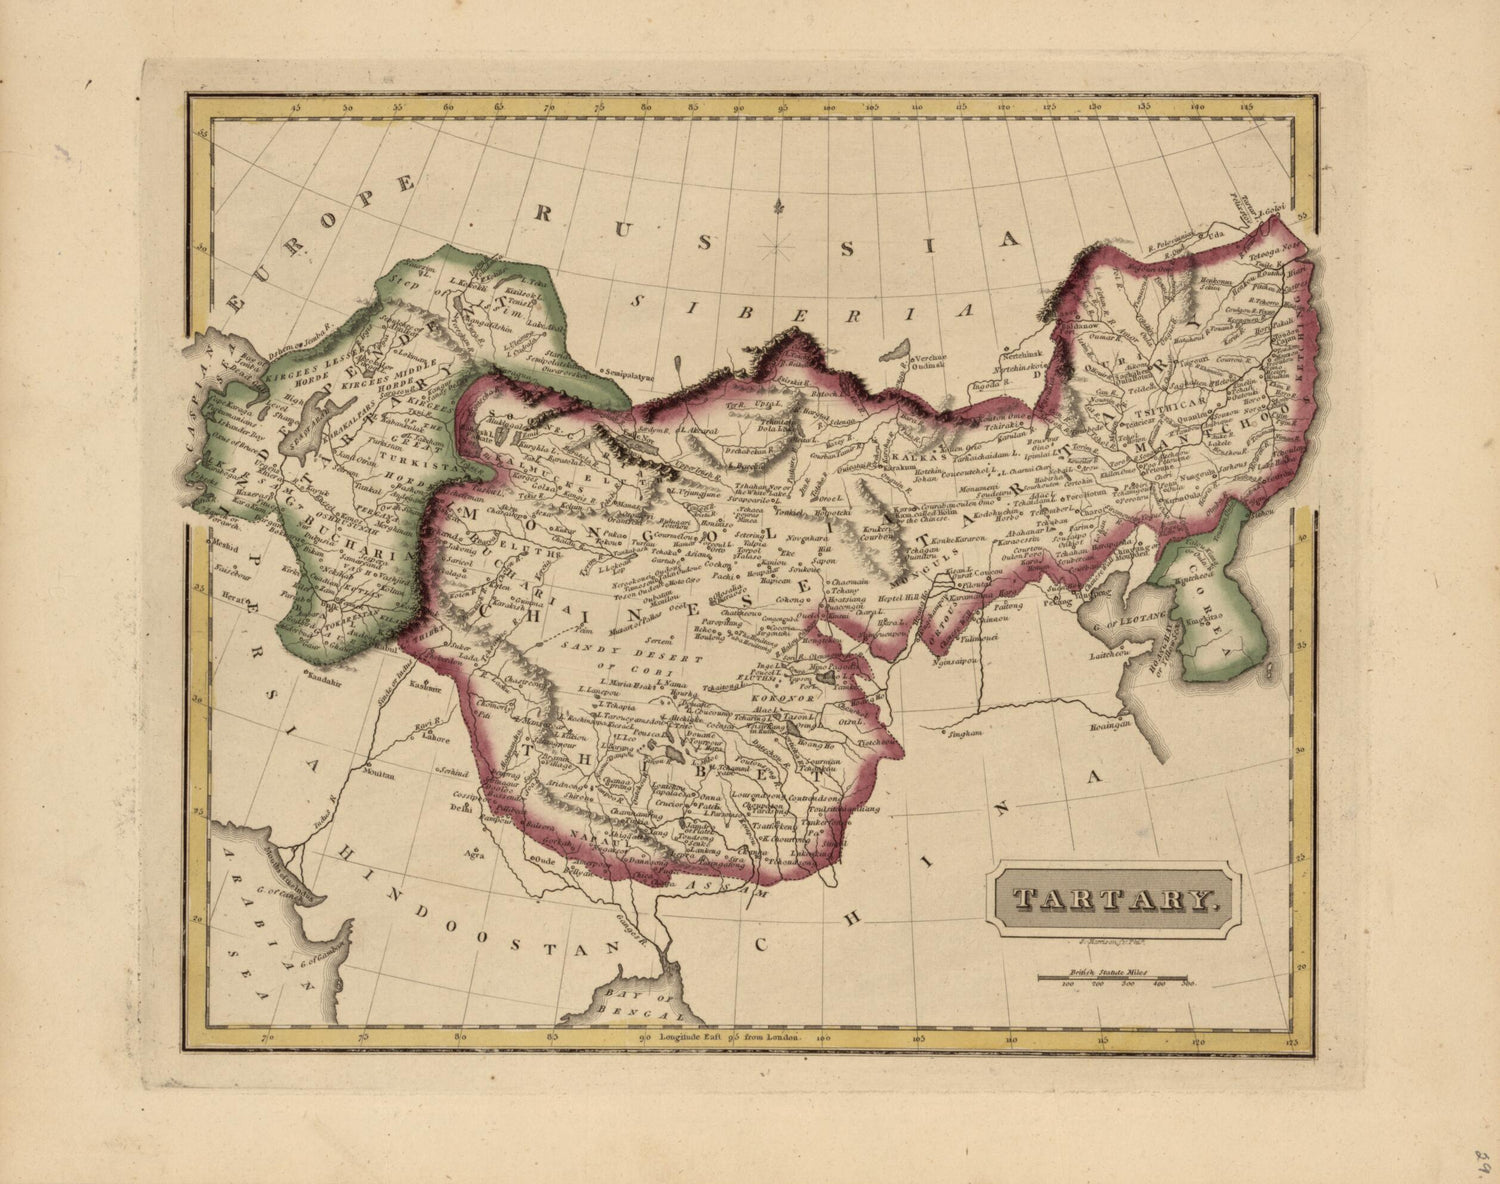 This old map of Tartary from a New and Elegant General Atlas, Containing Maps of Each of the United States. from 1817 was created by Henry Schenck Tanner in 1817